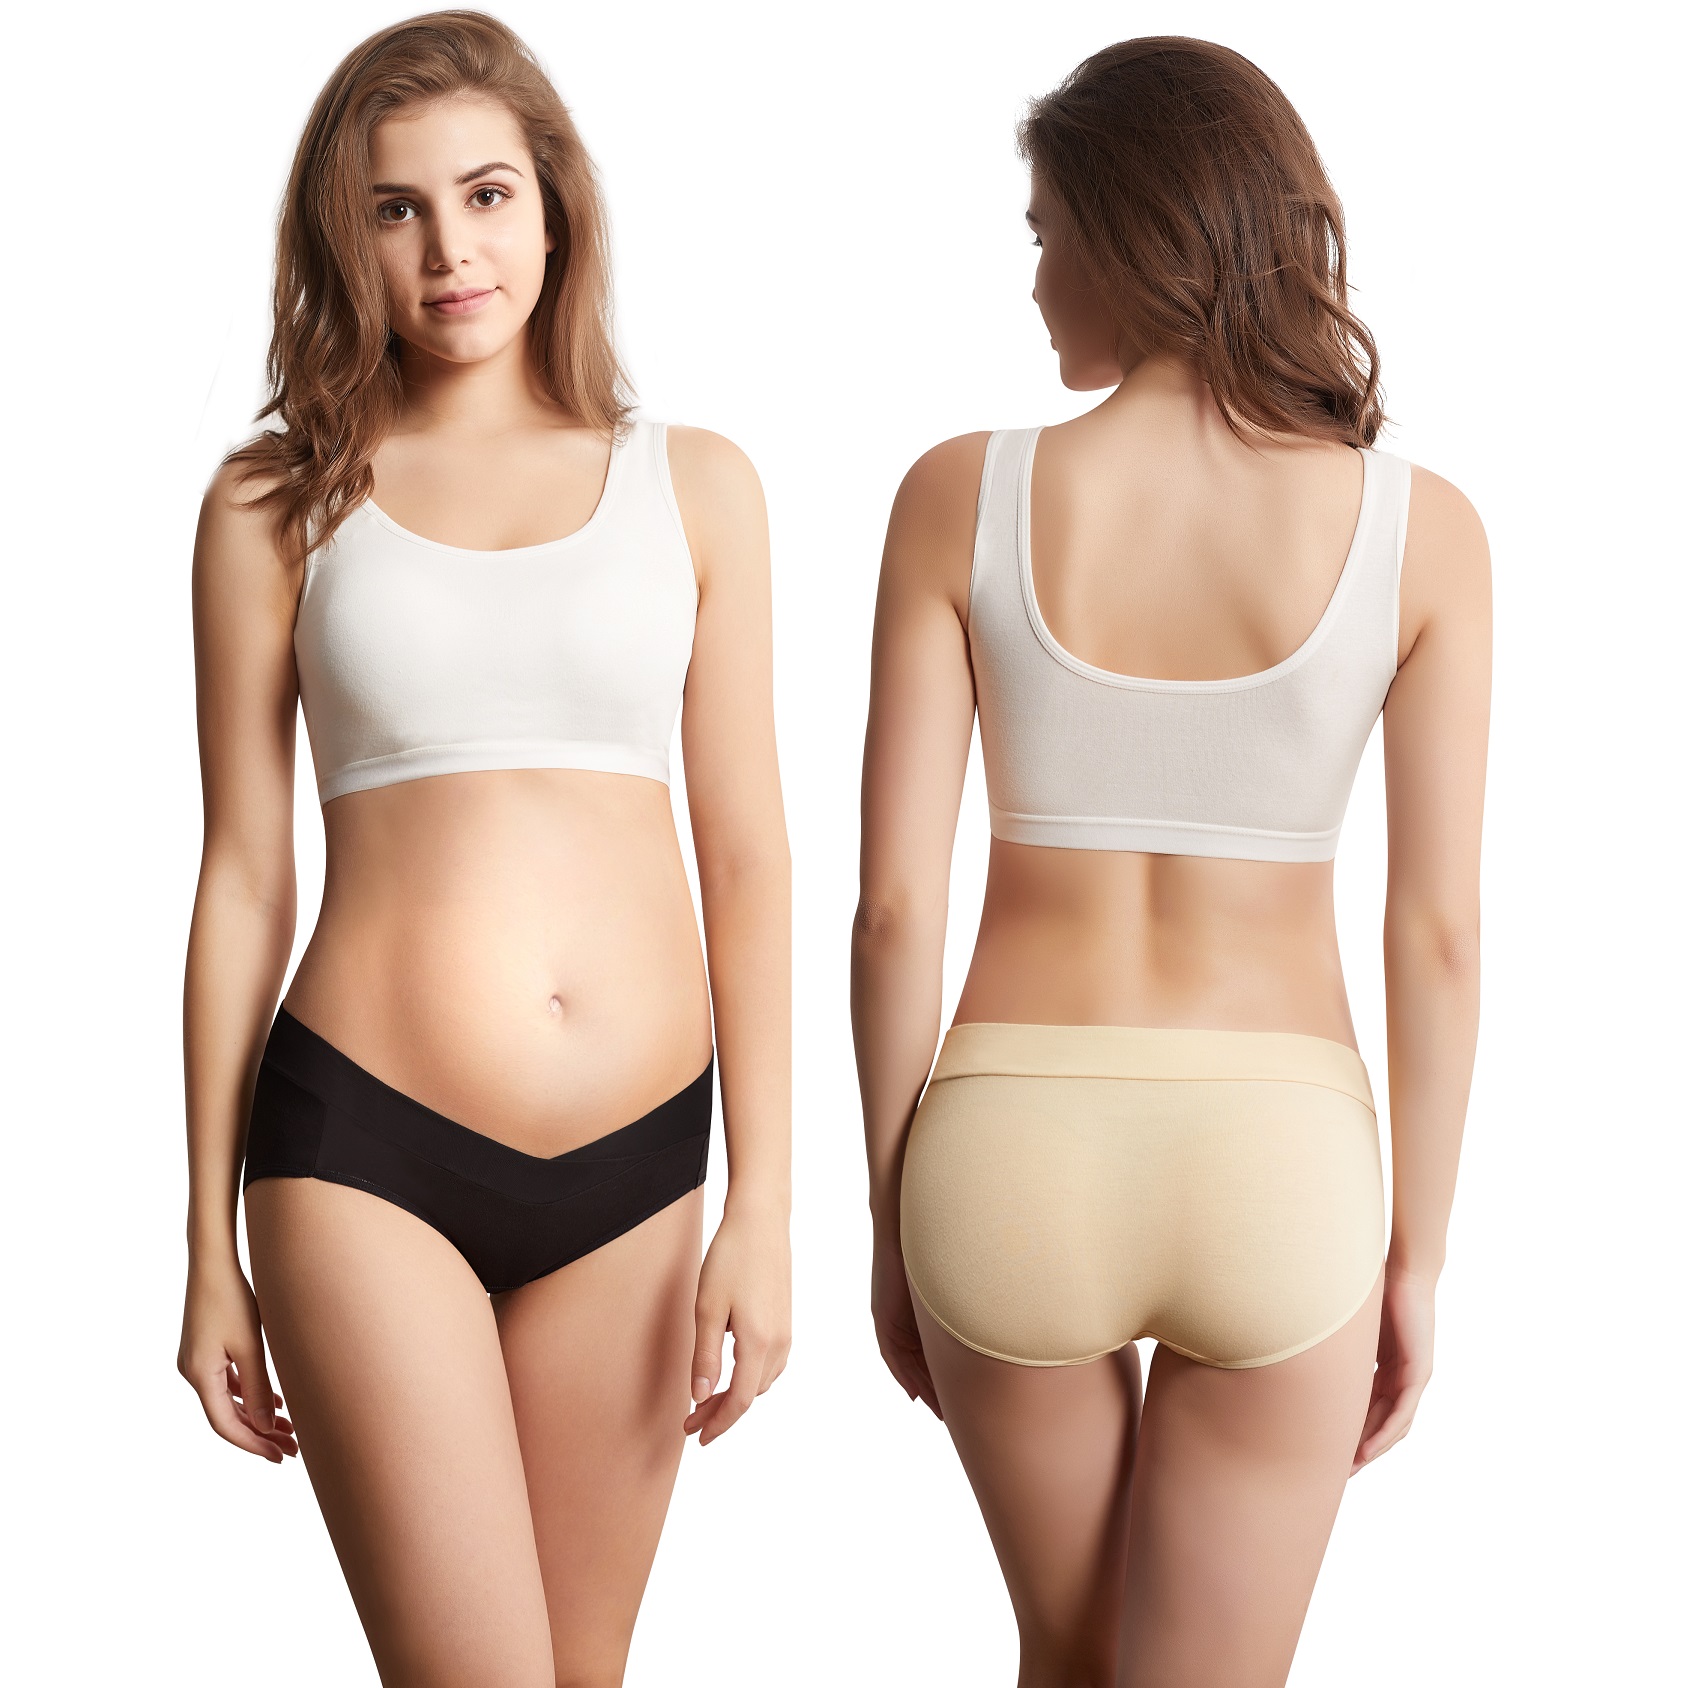 Maternity Over or Under the Bump Underwear Panties (3 Pack)